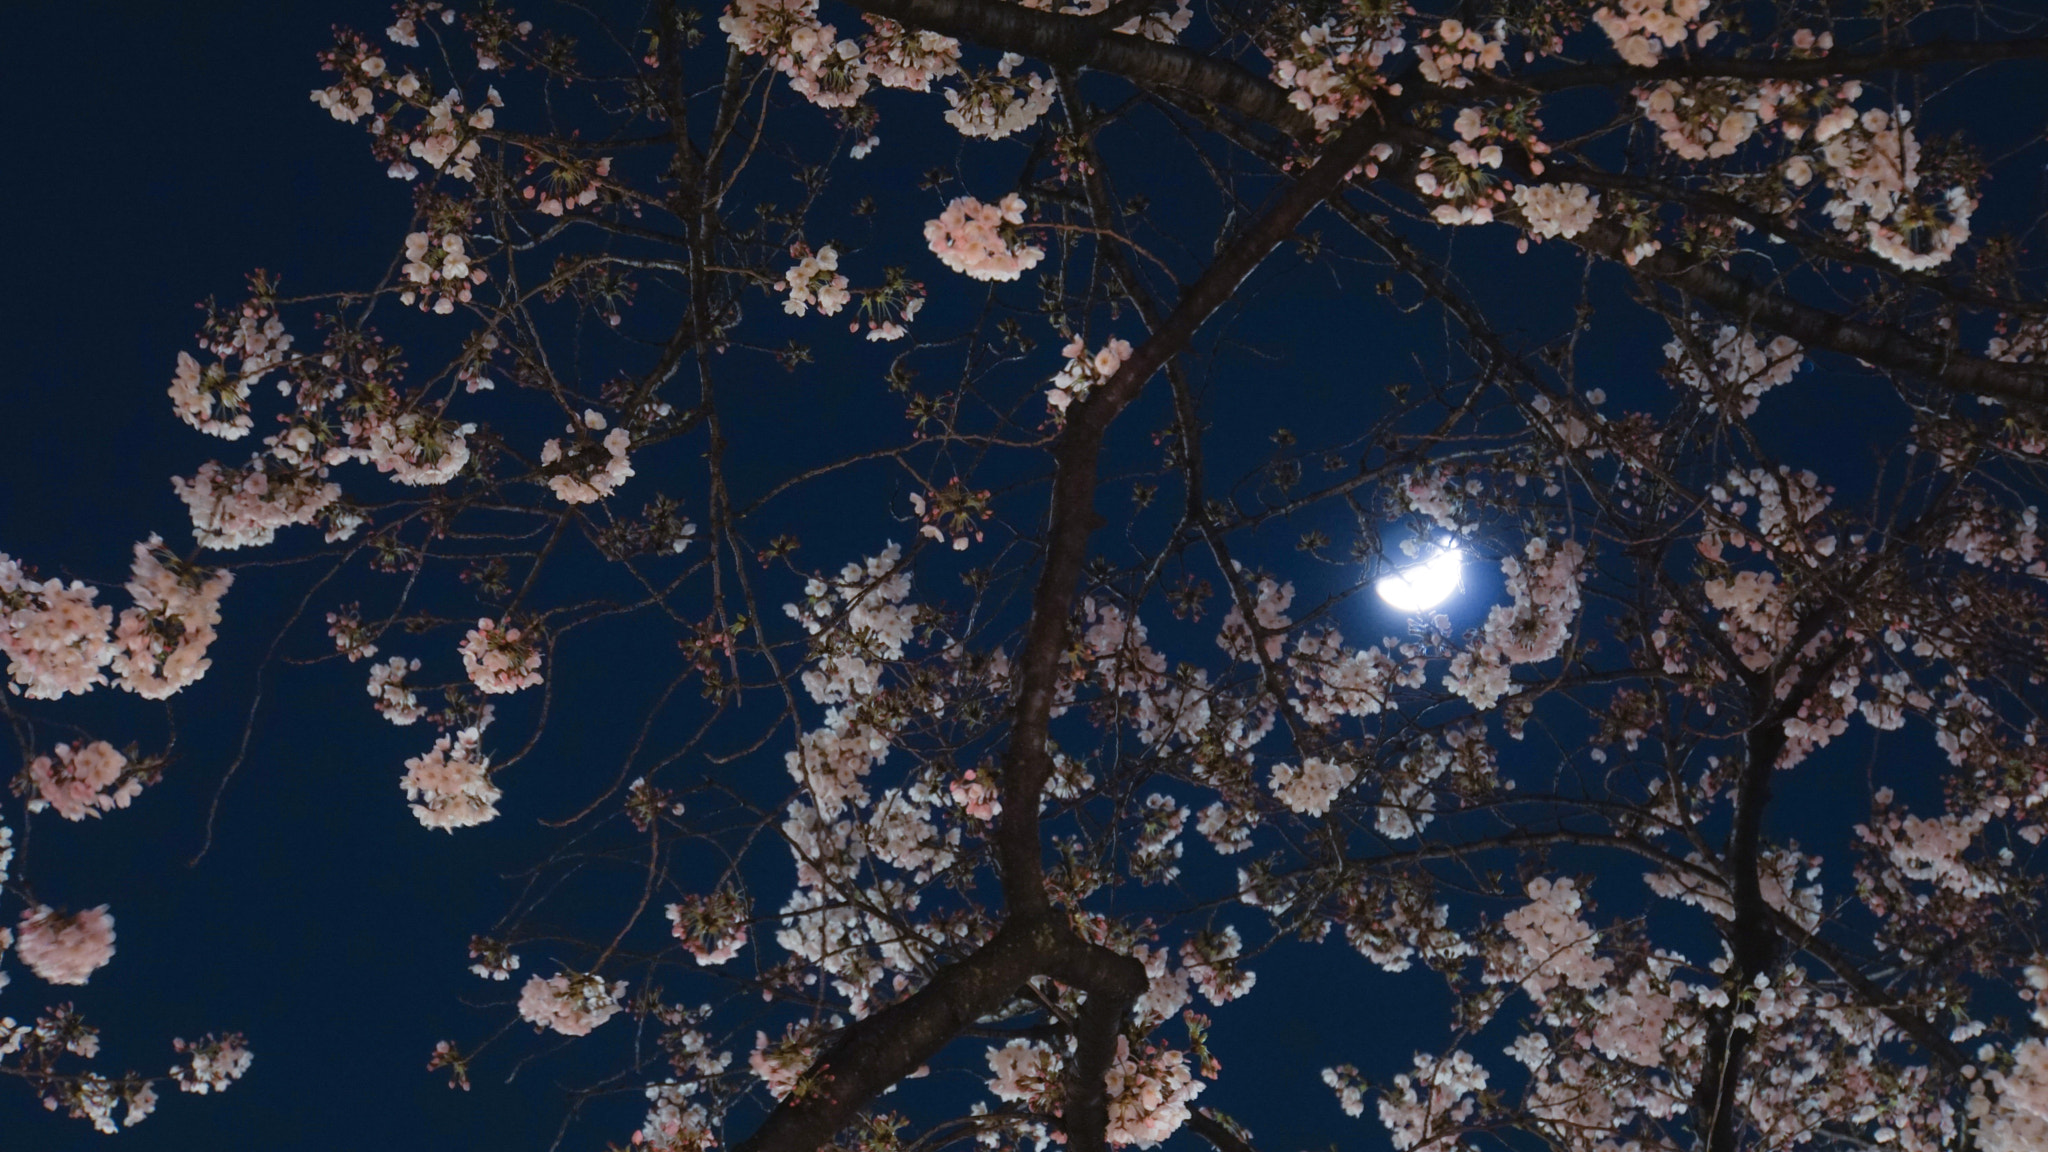 Sony a6000 sample photo. Cherry blossoms and moon photography